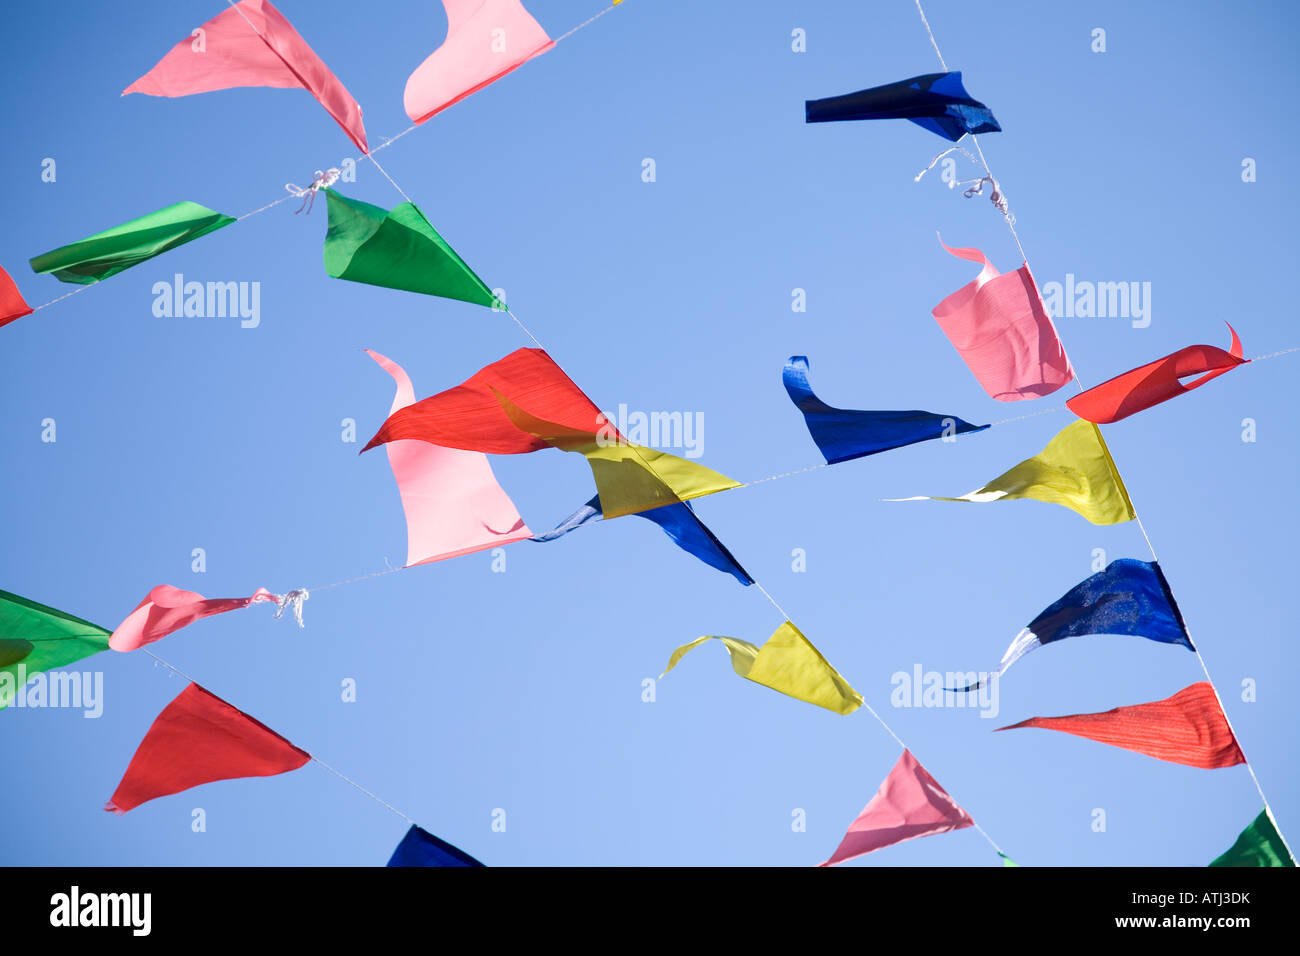 Colourful buntings or flags stretched across a blue sky background Stock Photo